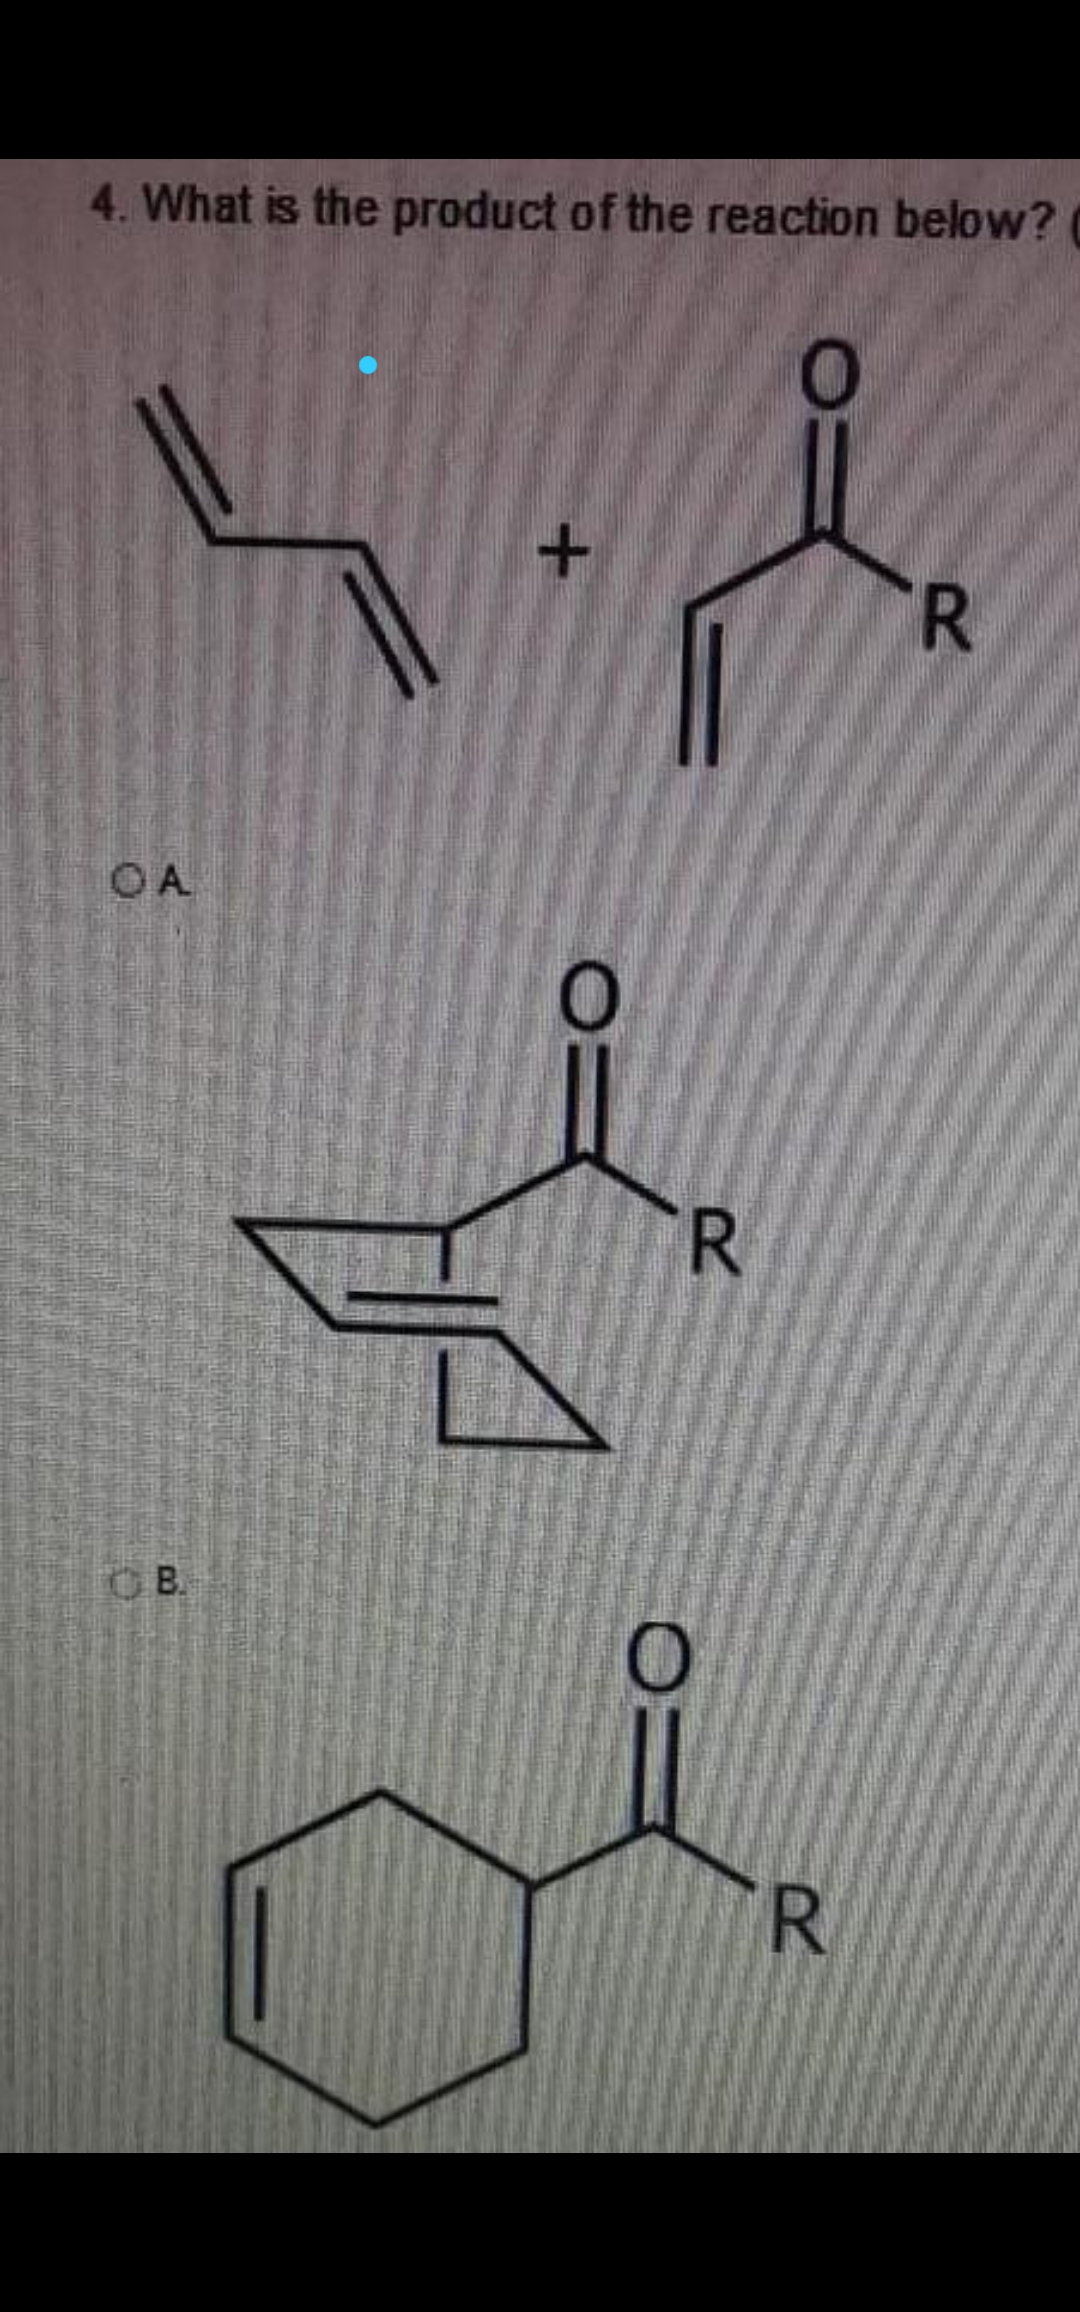 4. What is the product of the reaction below?
R.
OA
R.
OB.
R
